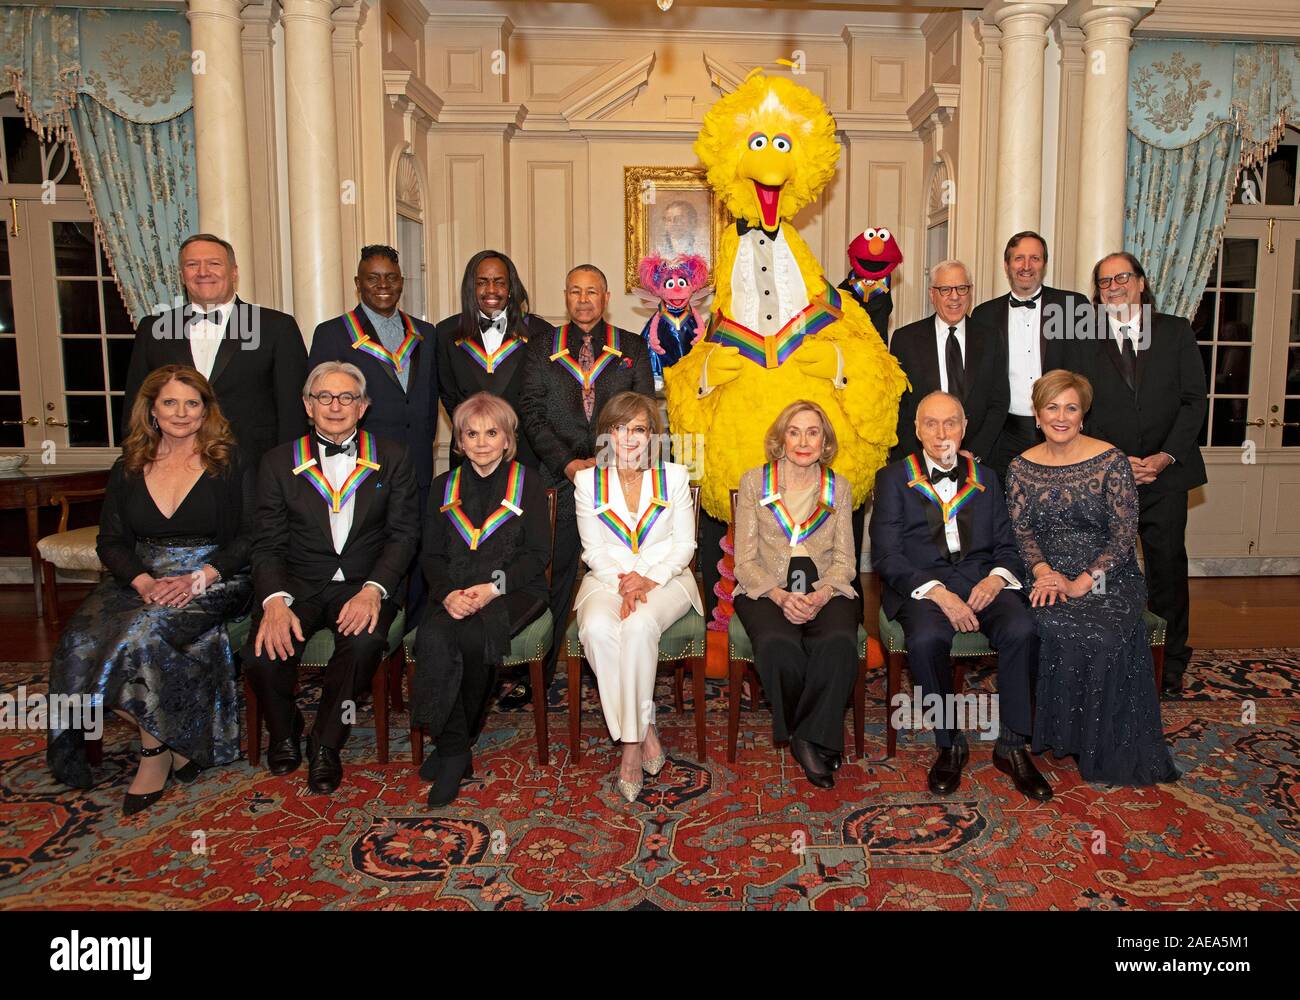 Washington DC, USA. 07th Dec, 2019. The recipients of the 42nd Annual Kennedy Center Honors pose for a group photo following a dinner at the United States Department of State in Washington, DC on Saturday, December 7, 2019. From left to right back row: United States Secretary of State Mike Pompeo; from the band Earth, Wind & Fire, singer Philip Bailey, bassist Verdine White, and percussionist Ralph Johnson; from Sesame Street, Abby, Big Bird, Elmo; David M. Rubenstein, Chairman, John F. Kennedy Center for the Performing Arts; producers Ricky Kirshner and Glenn Weiss. Front row, left to right:  Stock Photo